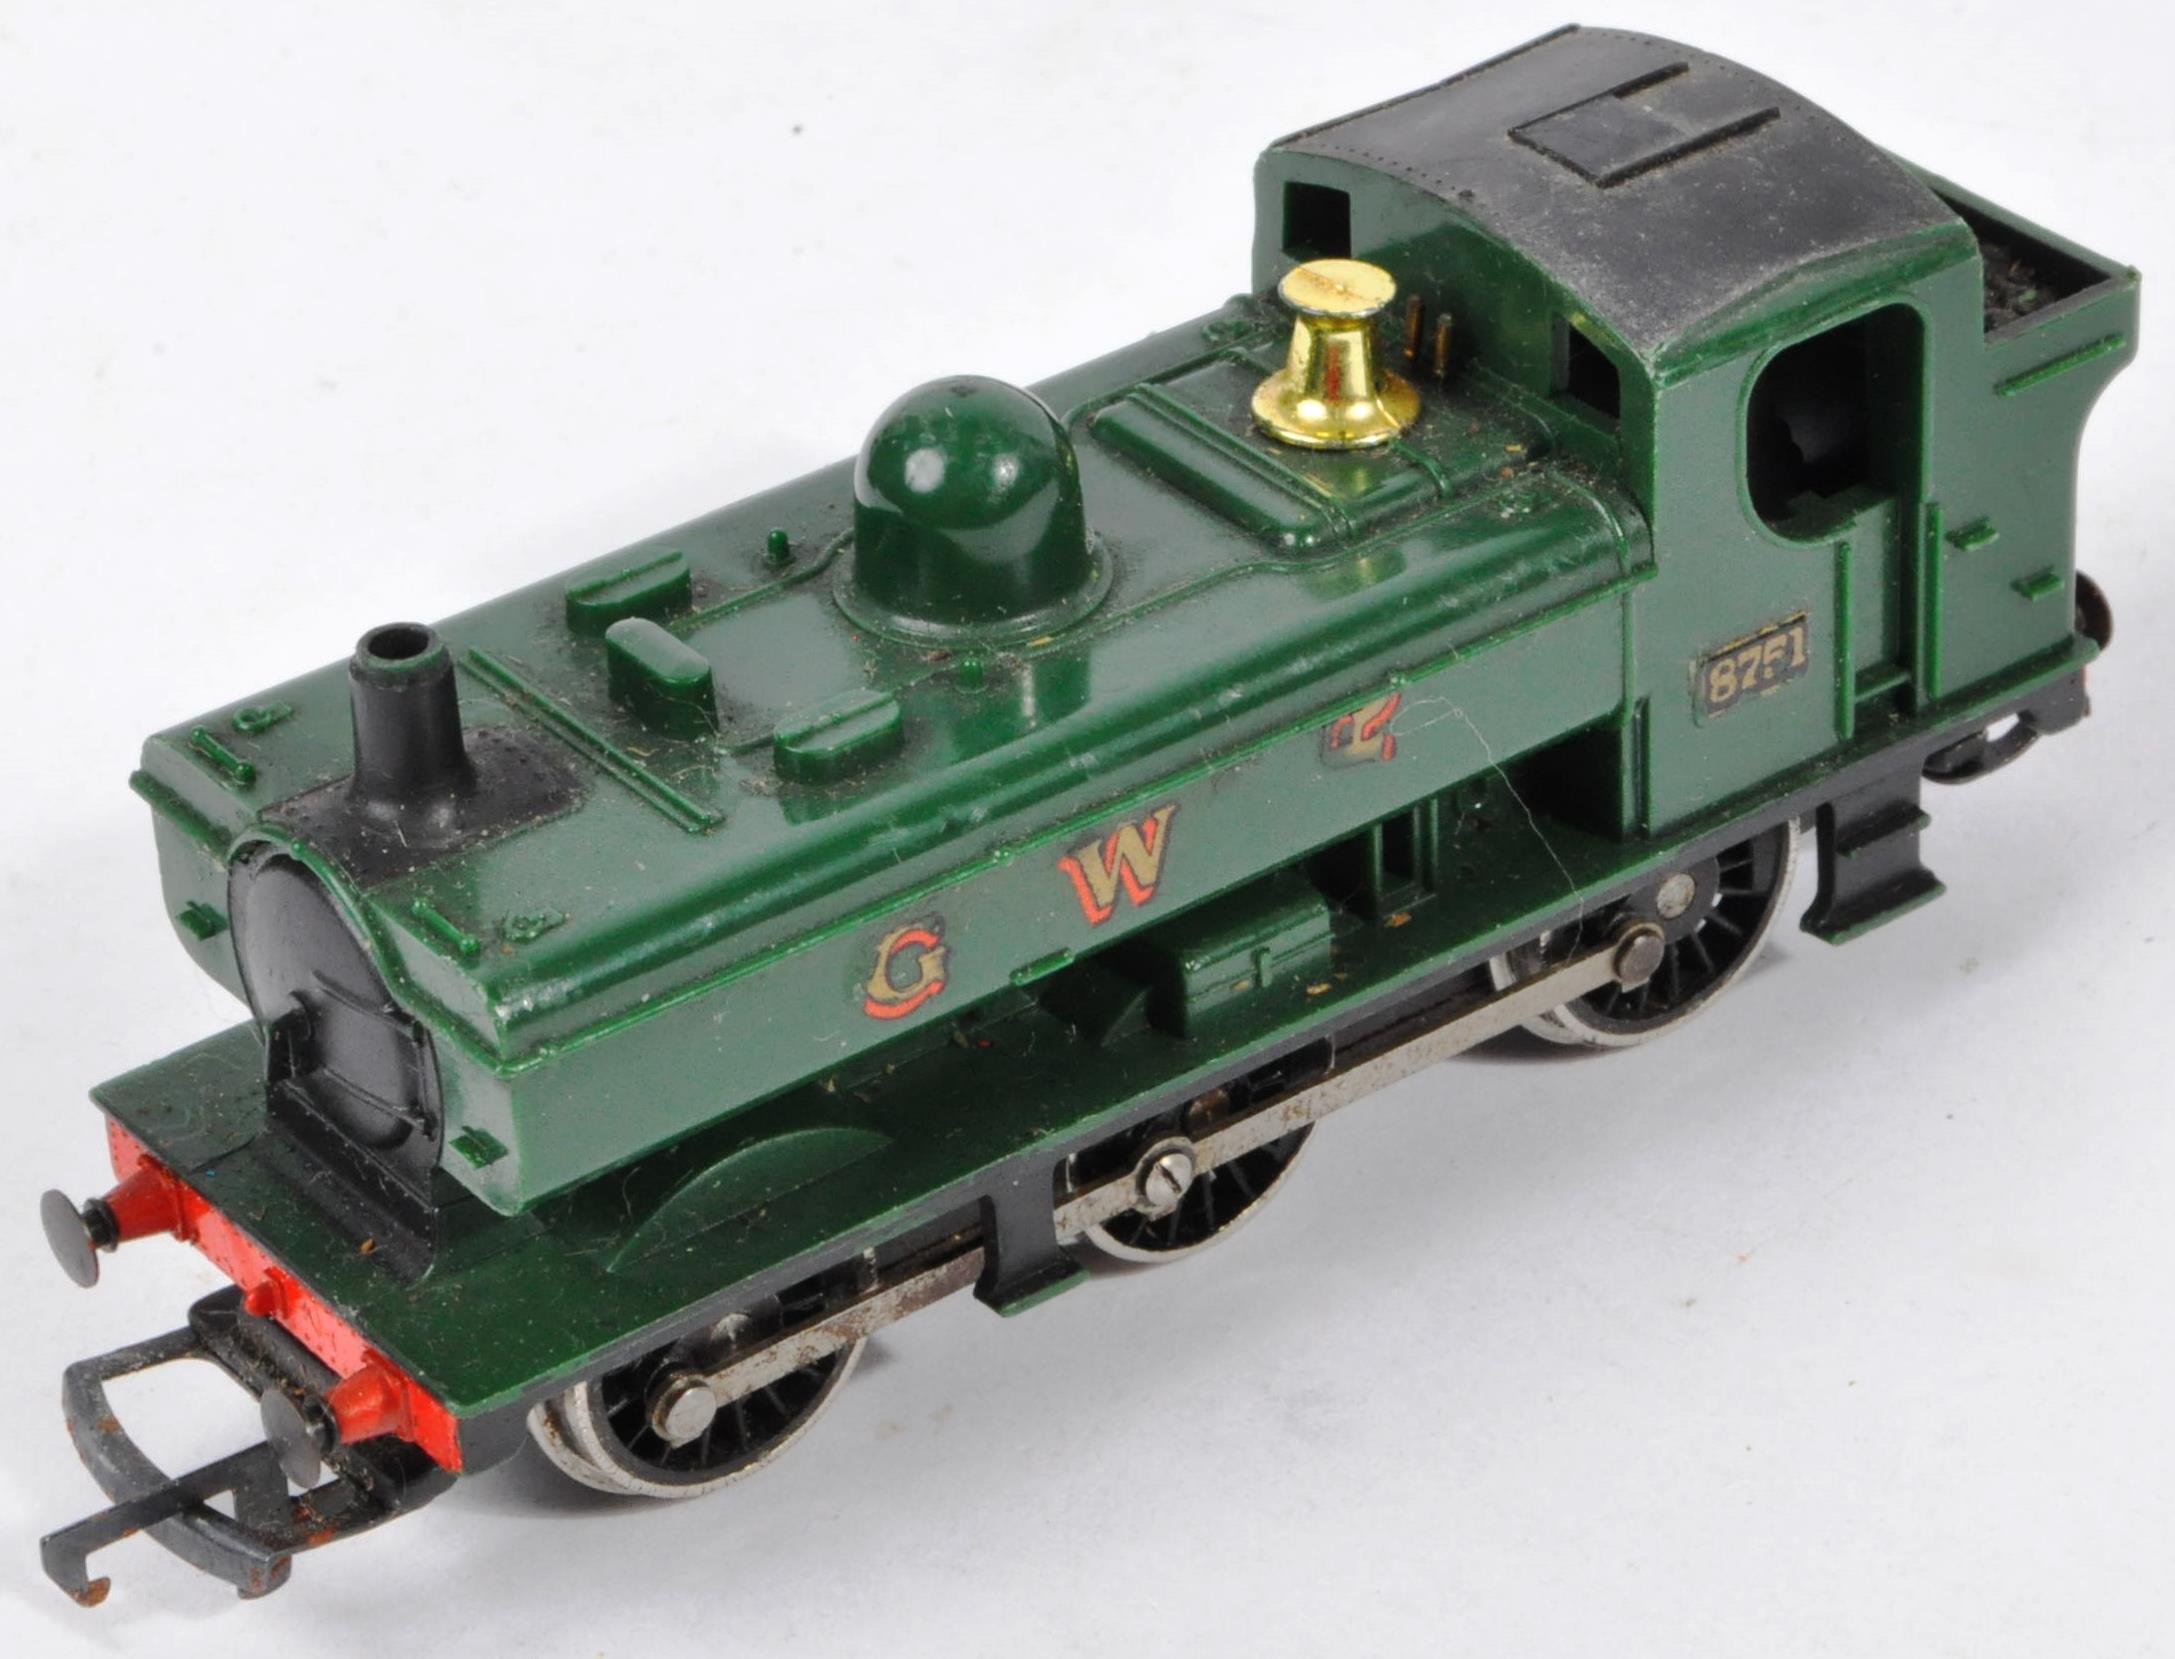 COLLECTION OF HORNBY / TRIANG TRAIN SET LOCOMOTIVE ENGINES - Image 3 of 8